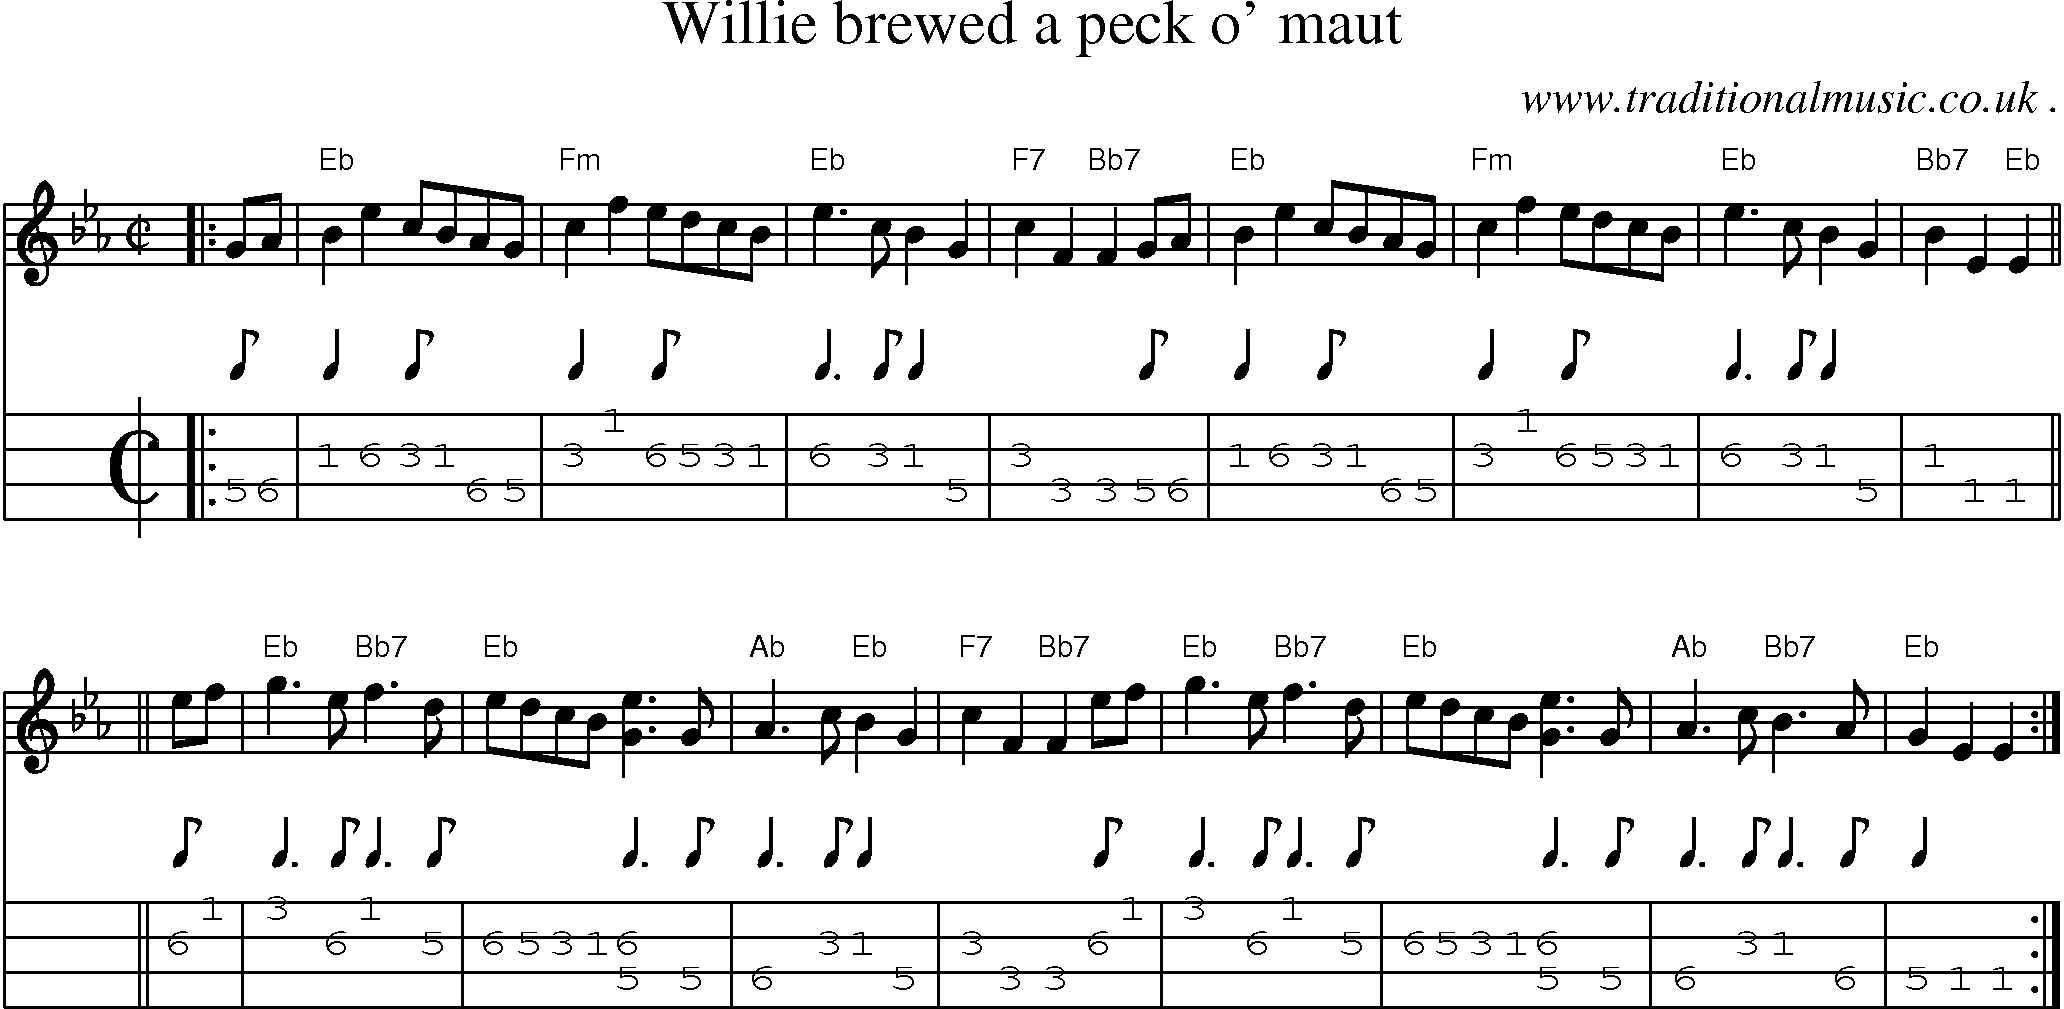 Sheet-music  score, Chords and Mandolin Tabs for Willie Brewed A Peck O Maut